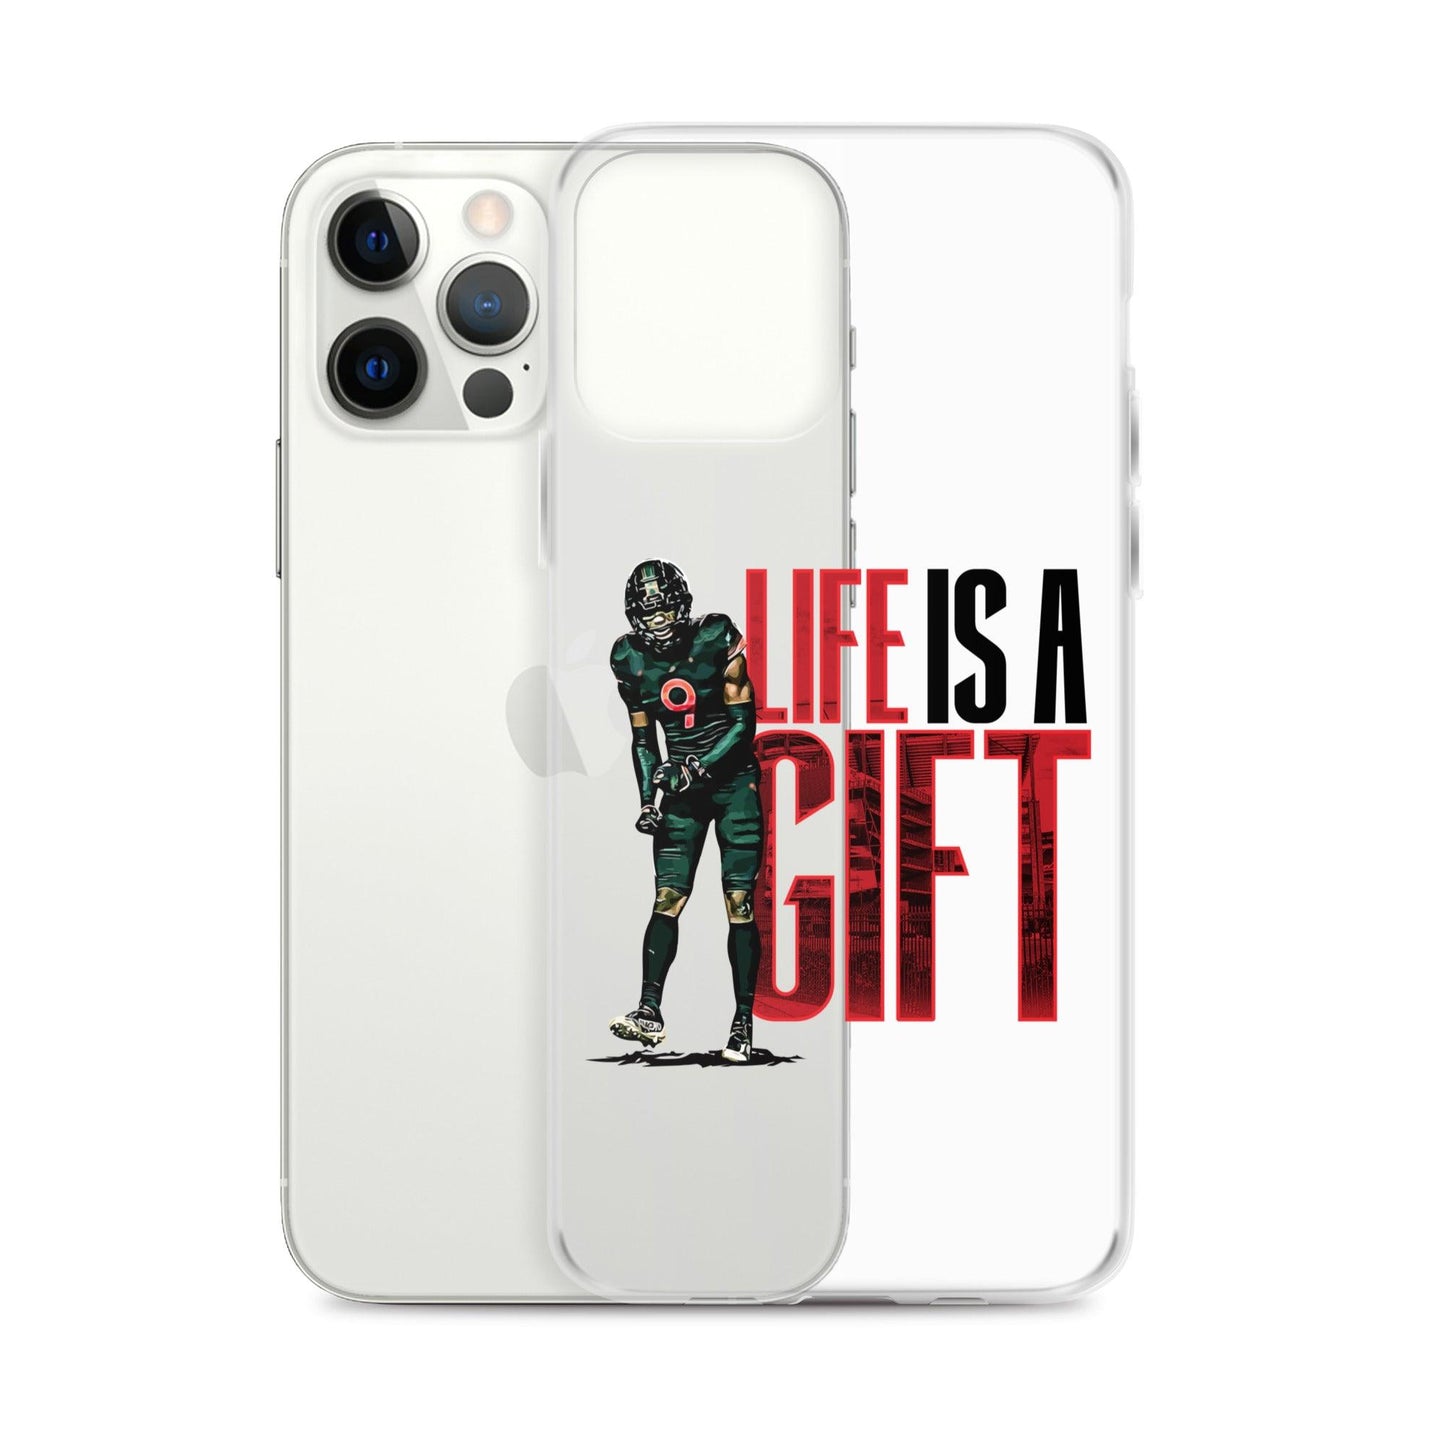 Avery Huff Jr. “Gifted” iPhone Case - Fan Arch